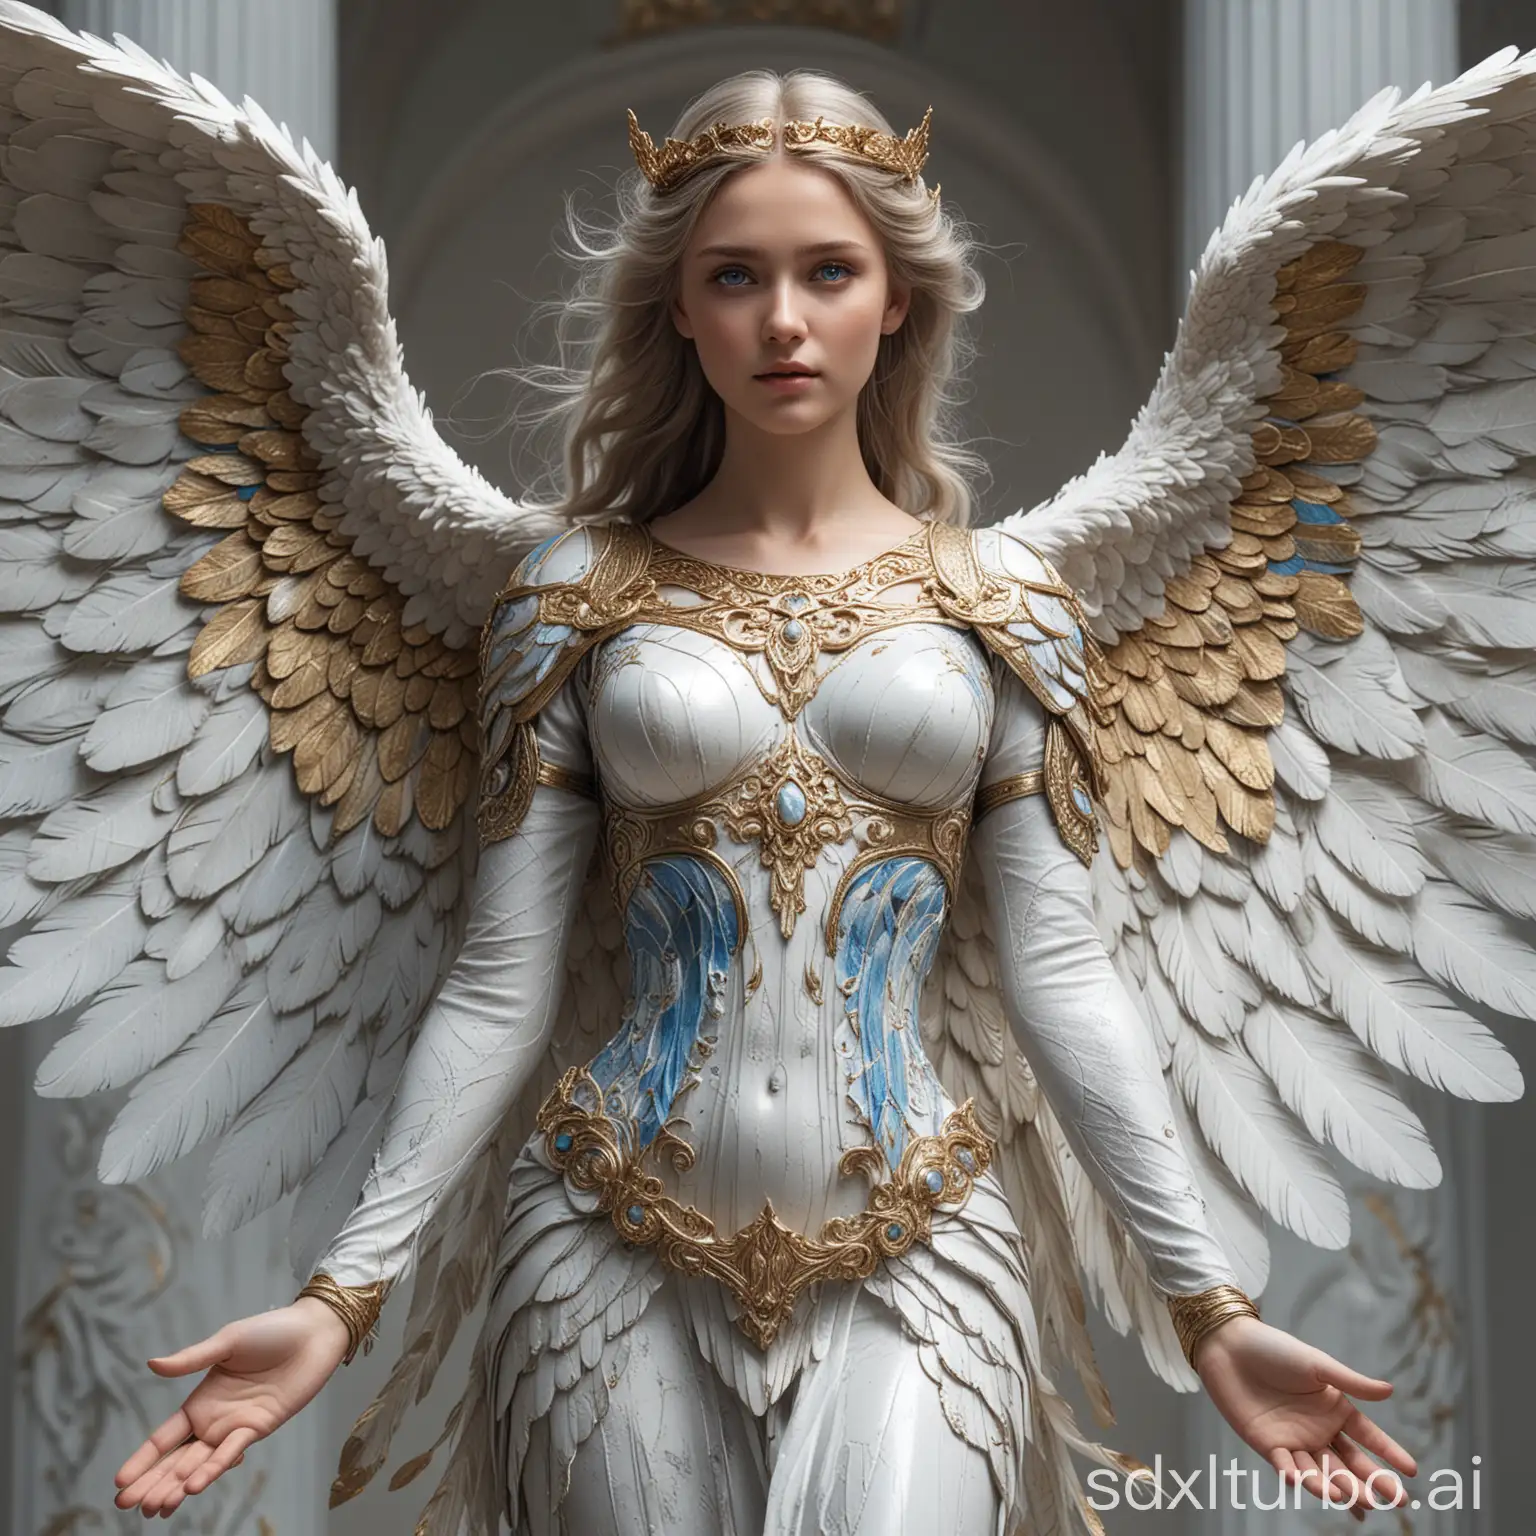 A RAW photo of a magnificent angel with details, including a full-body shot from a distance where both the body and wings are visible. The image features sharp focus, clear bright blue eyes that are striking, detailed facial features and skin texture, wings spread out with gold and silver tips on the feathers, intricate marble and bone patterns intertwined and swirling in a final fantasy style. The angel is stunningly beautiful, wearing translucent, high-quality attire suitable for both photos and artistic renderings in 8k resolution with high detail and realistic lighting, focusing on the hands and face. The image has a painterly quality and strong composition, earning awards and set against a simple white background.